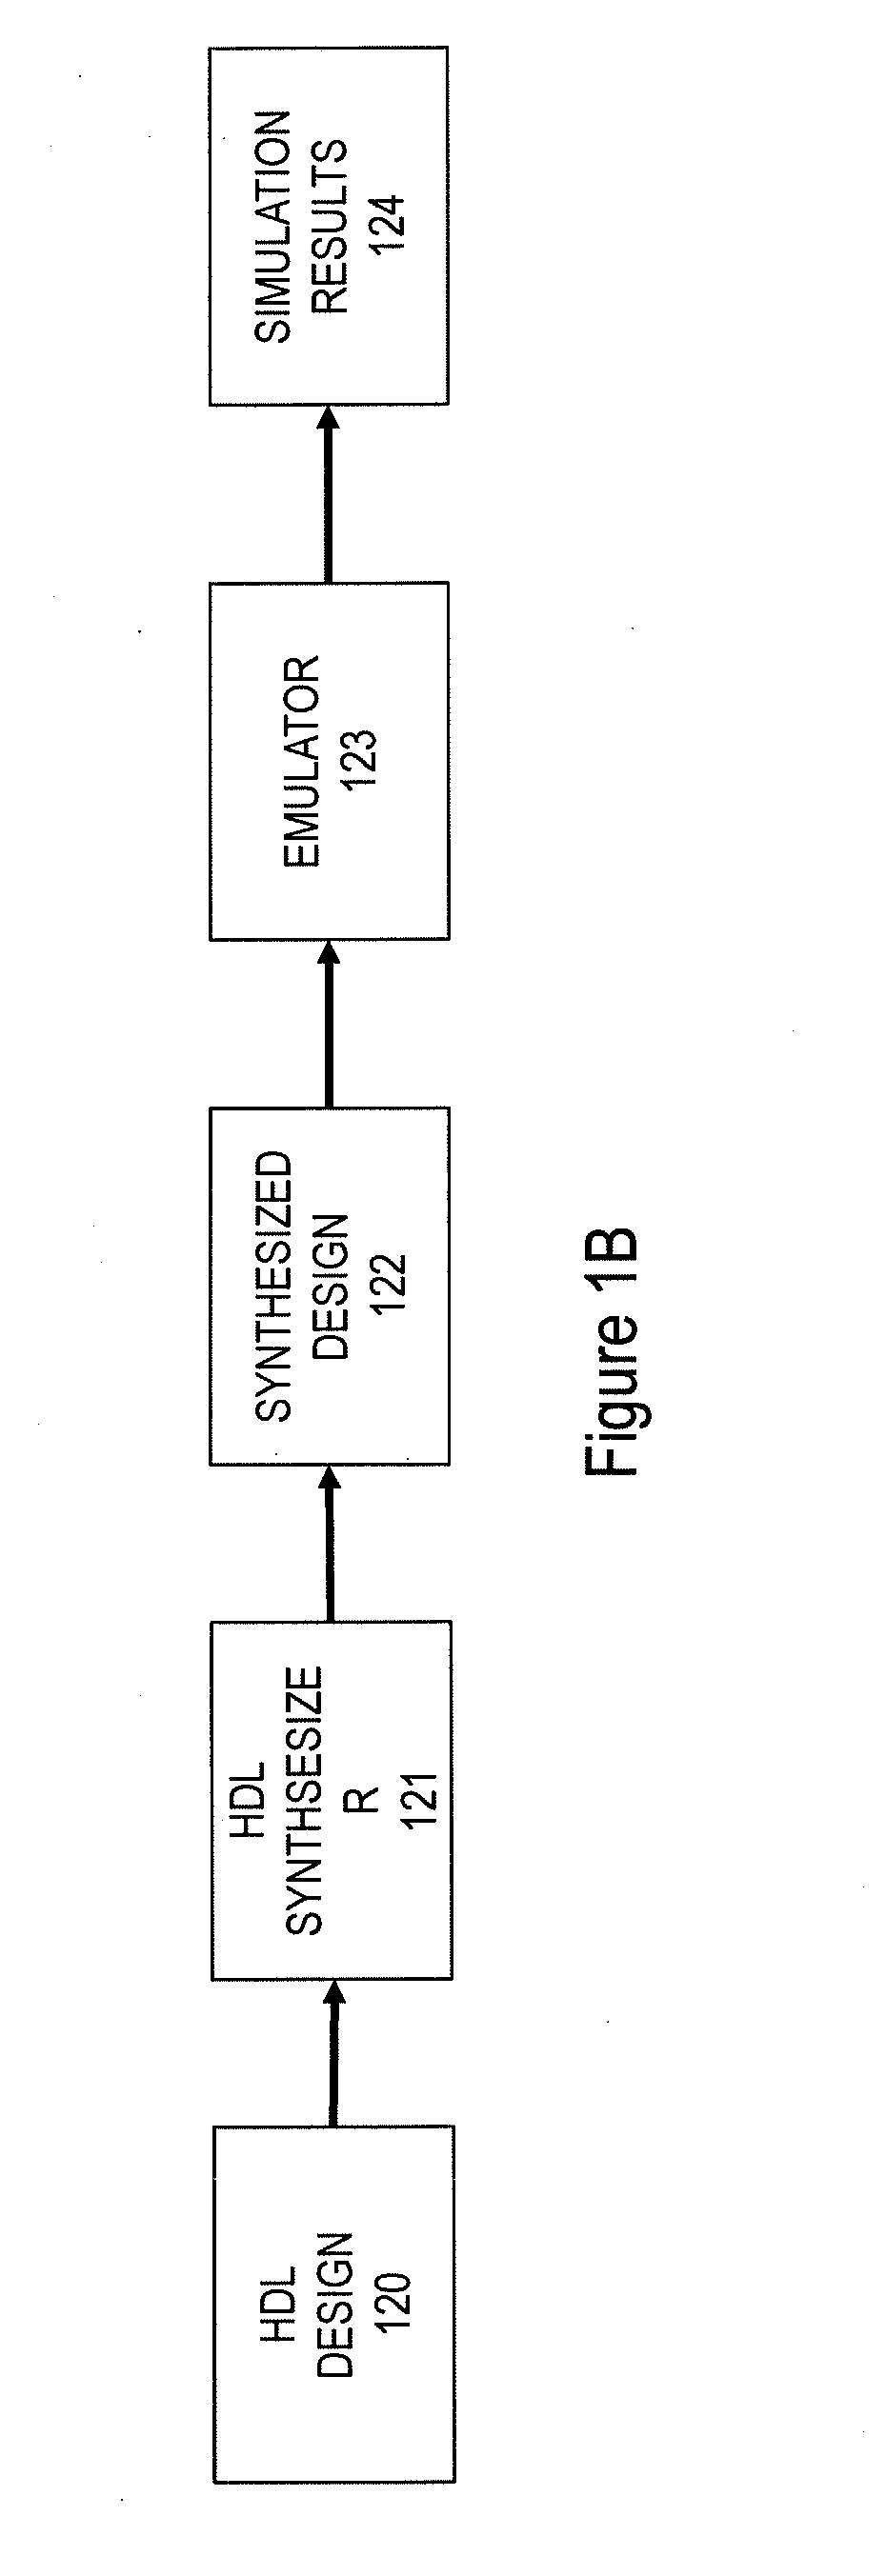 Hardware simulation controller, system and method for functional verification